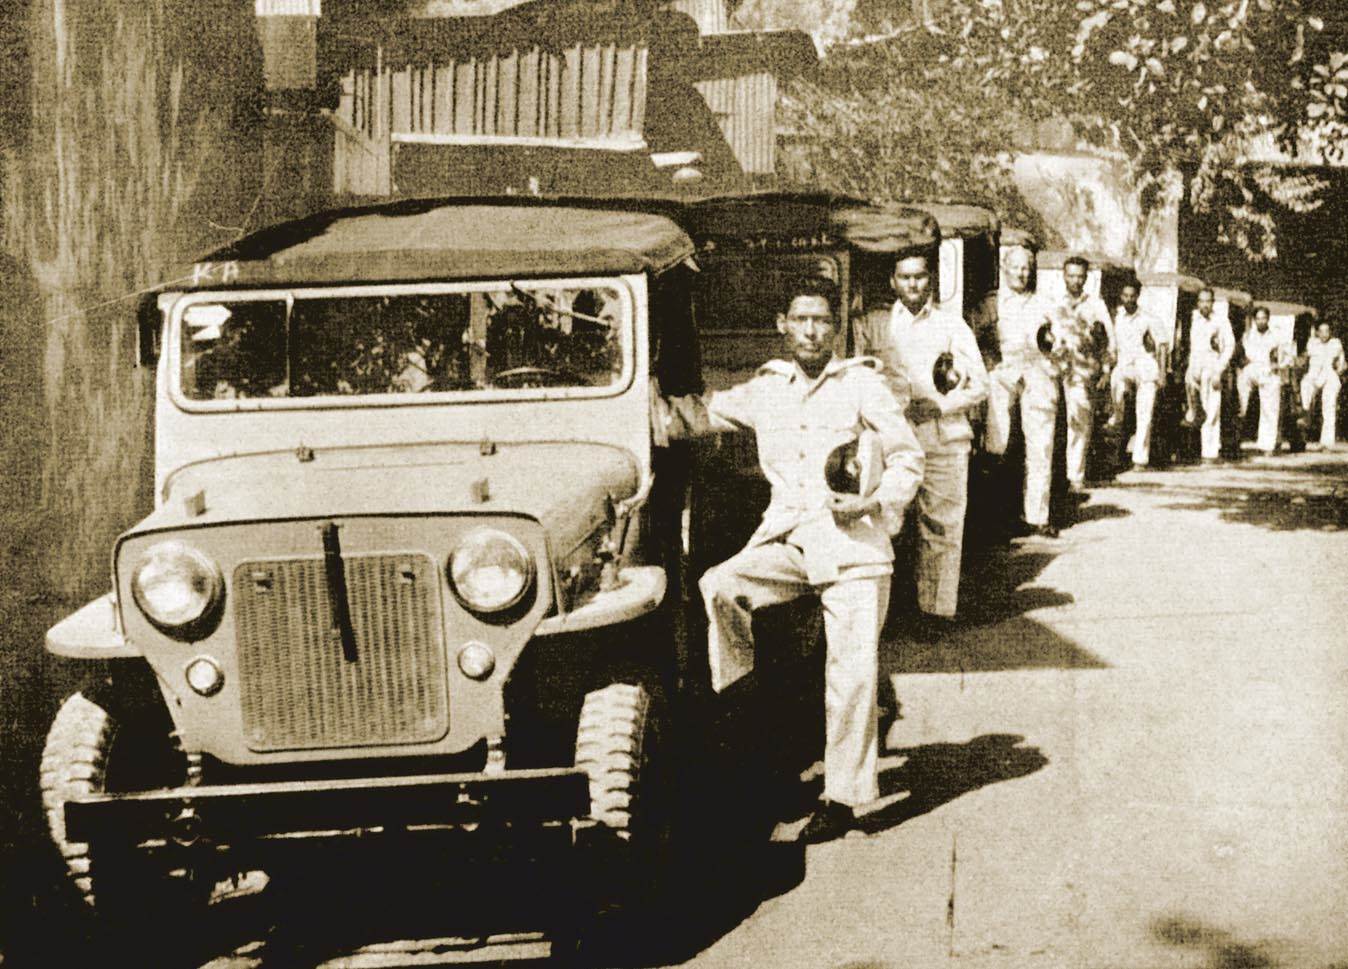 1954-mahindra-jeeps-roll-out-of-the-mazagaon-factory-in-bombay-ready-for-delivery